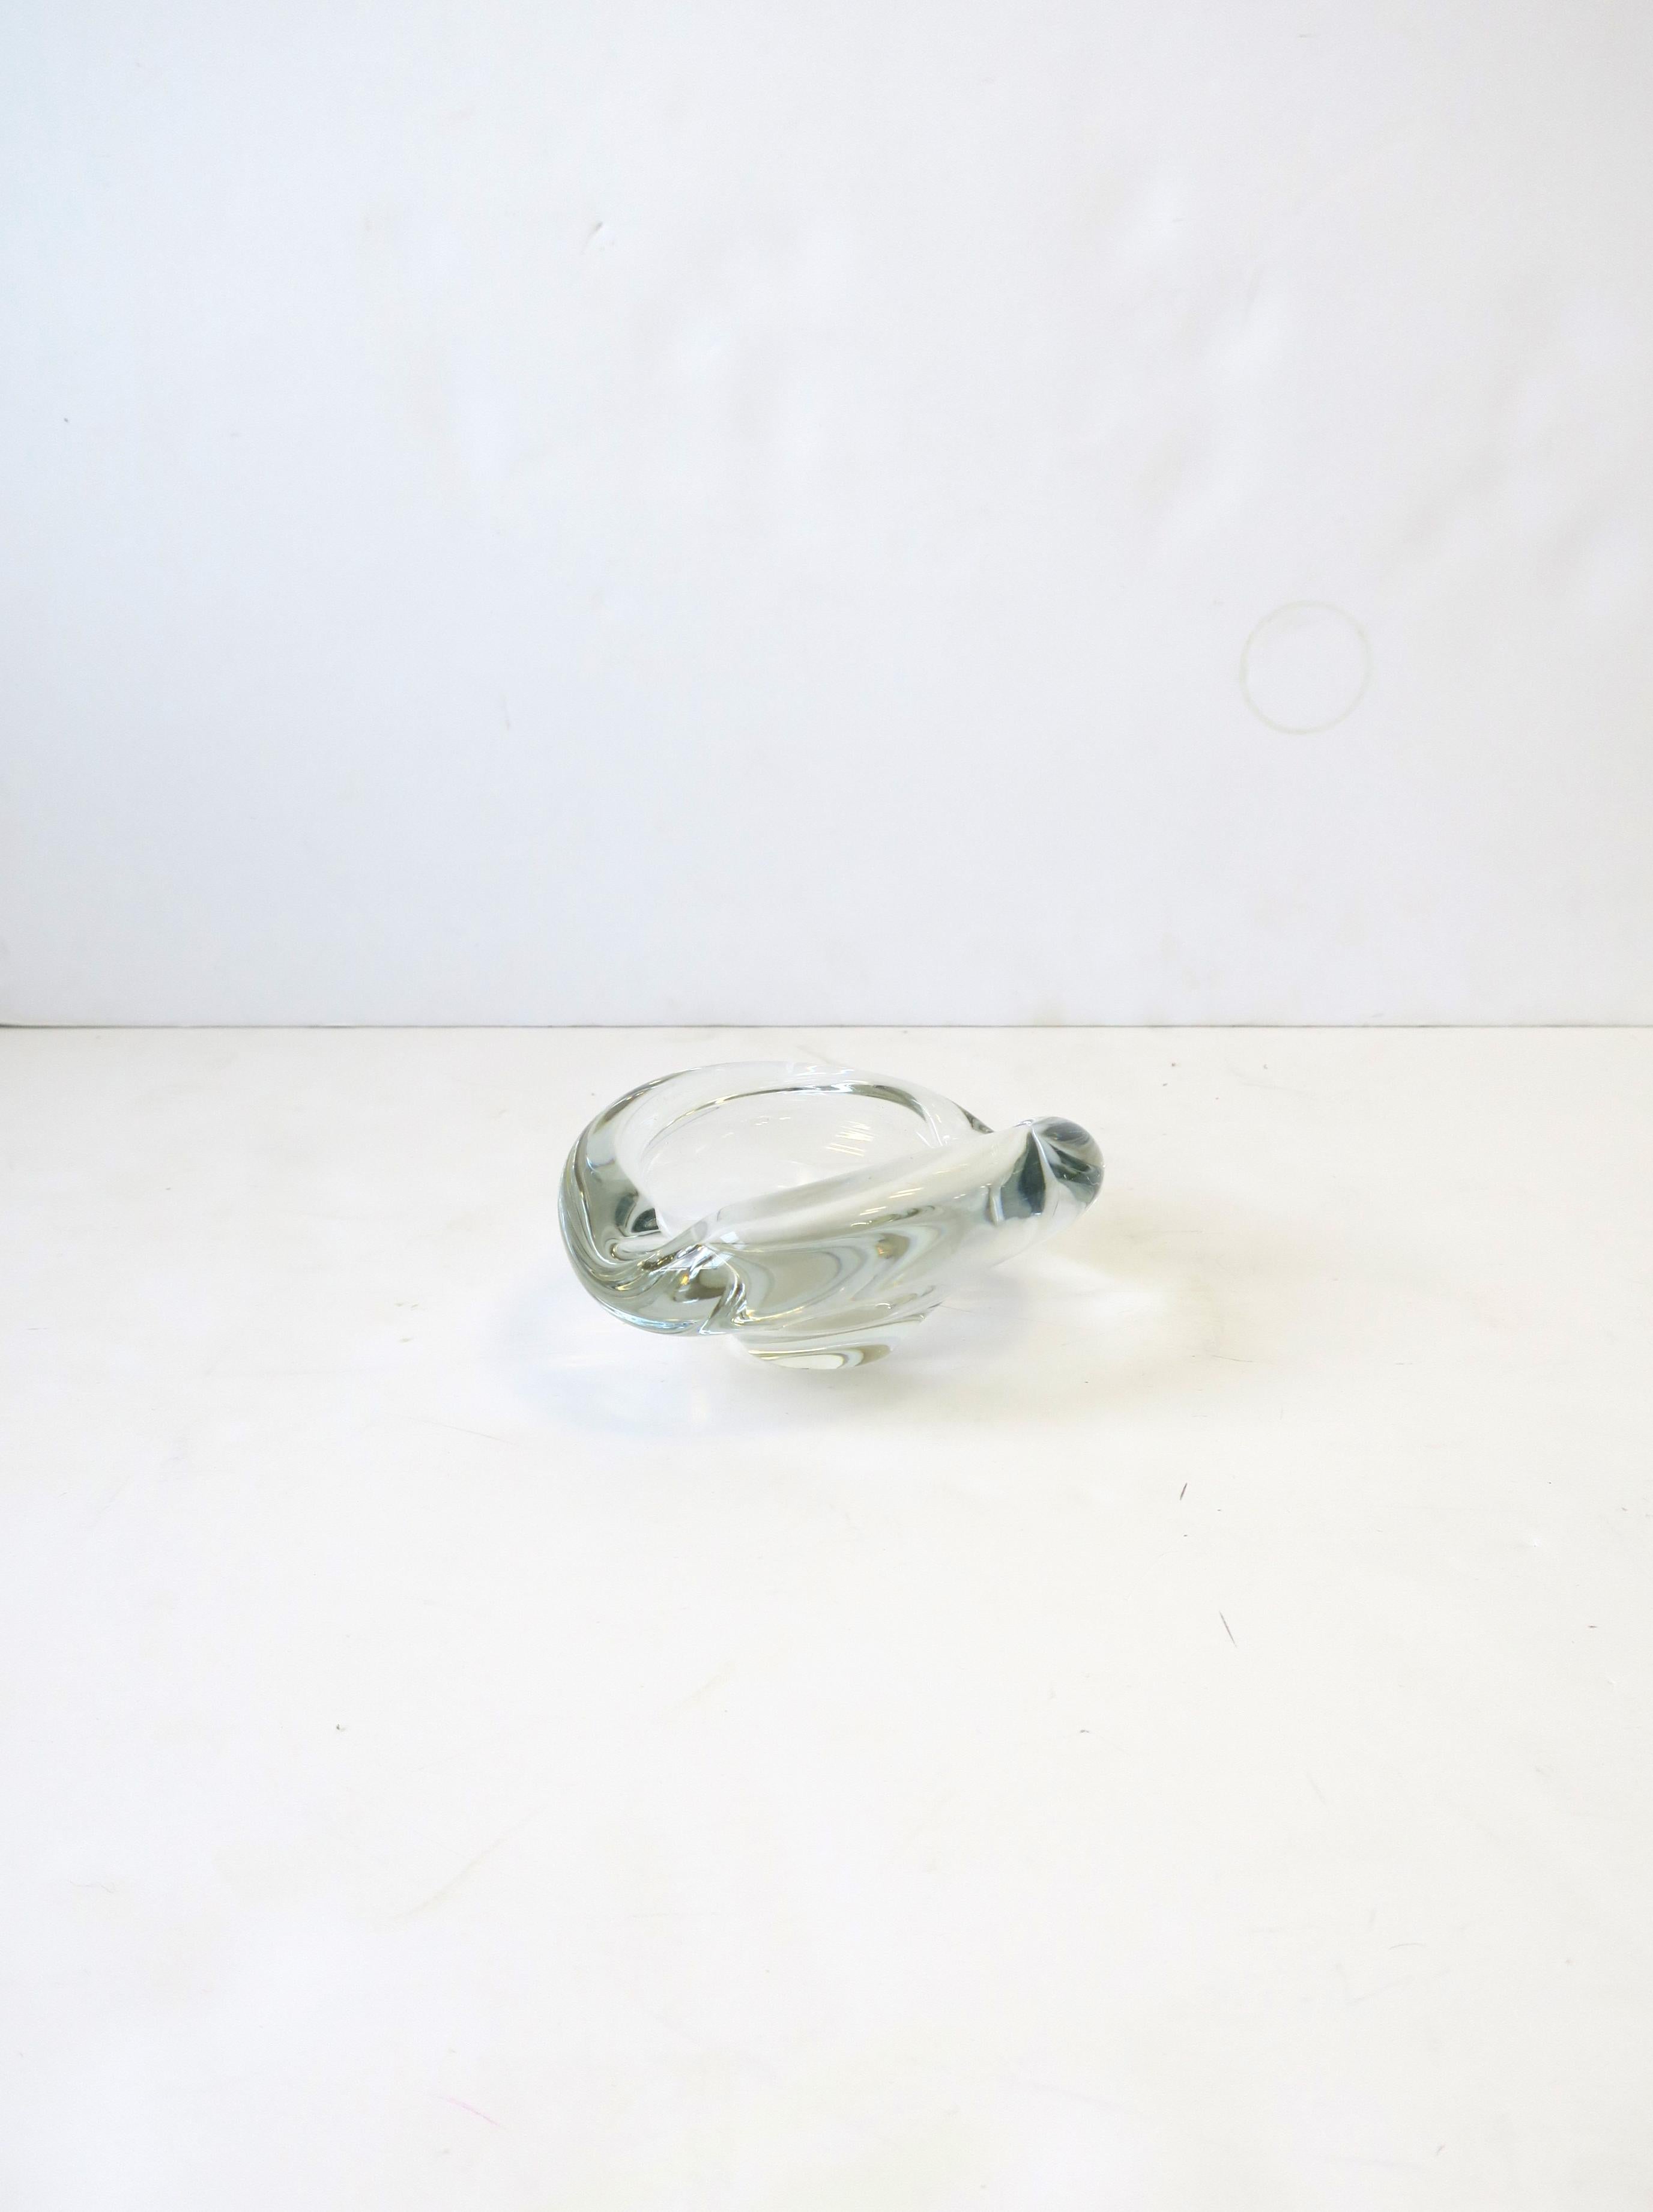 A beautiful and substantial signed Scandinavian Modern Danish modern clear/transparent art glass bowl or ashtray, 1958, Denmark, by Holmegaard. Bowl has marker's mark (Holmegaard), year (1958), and artist initial in-between year, all on bottom base